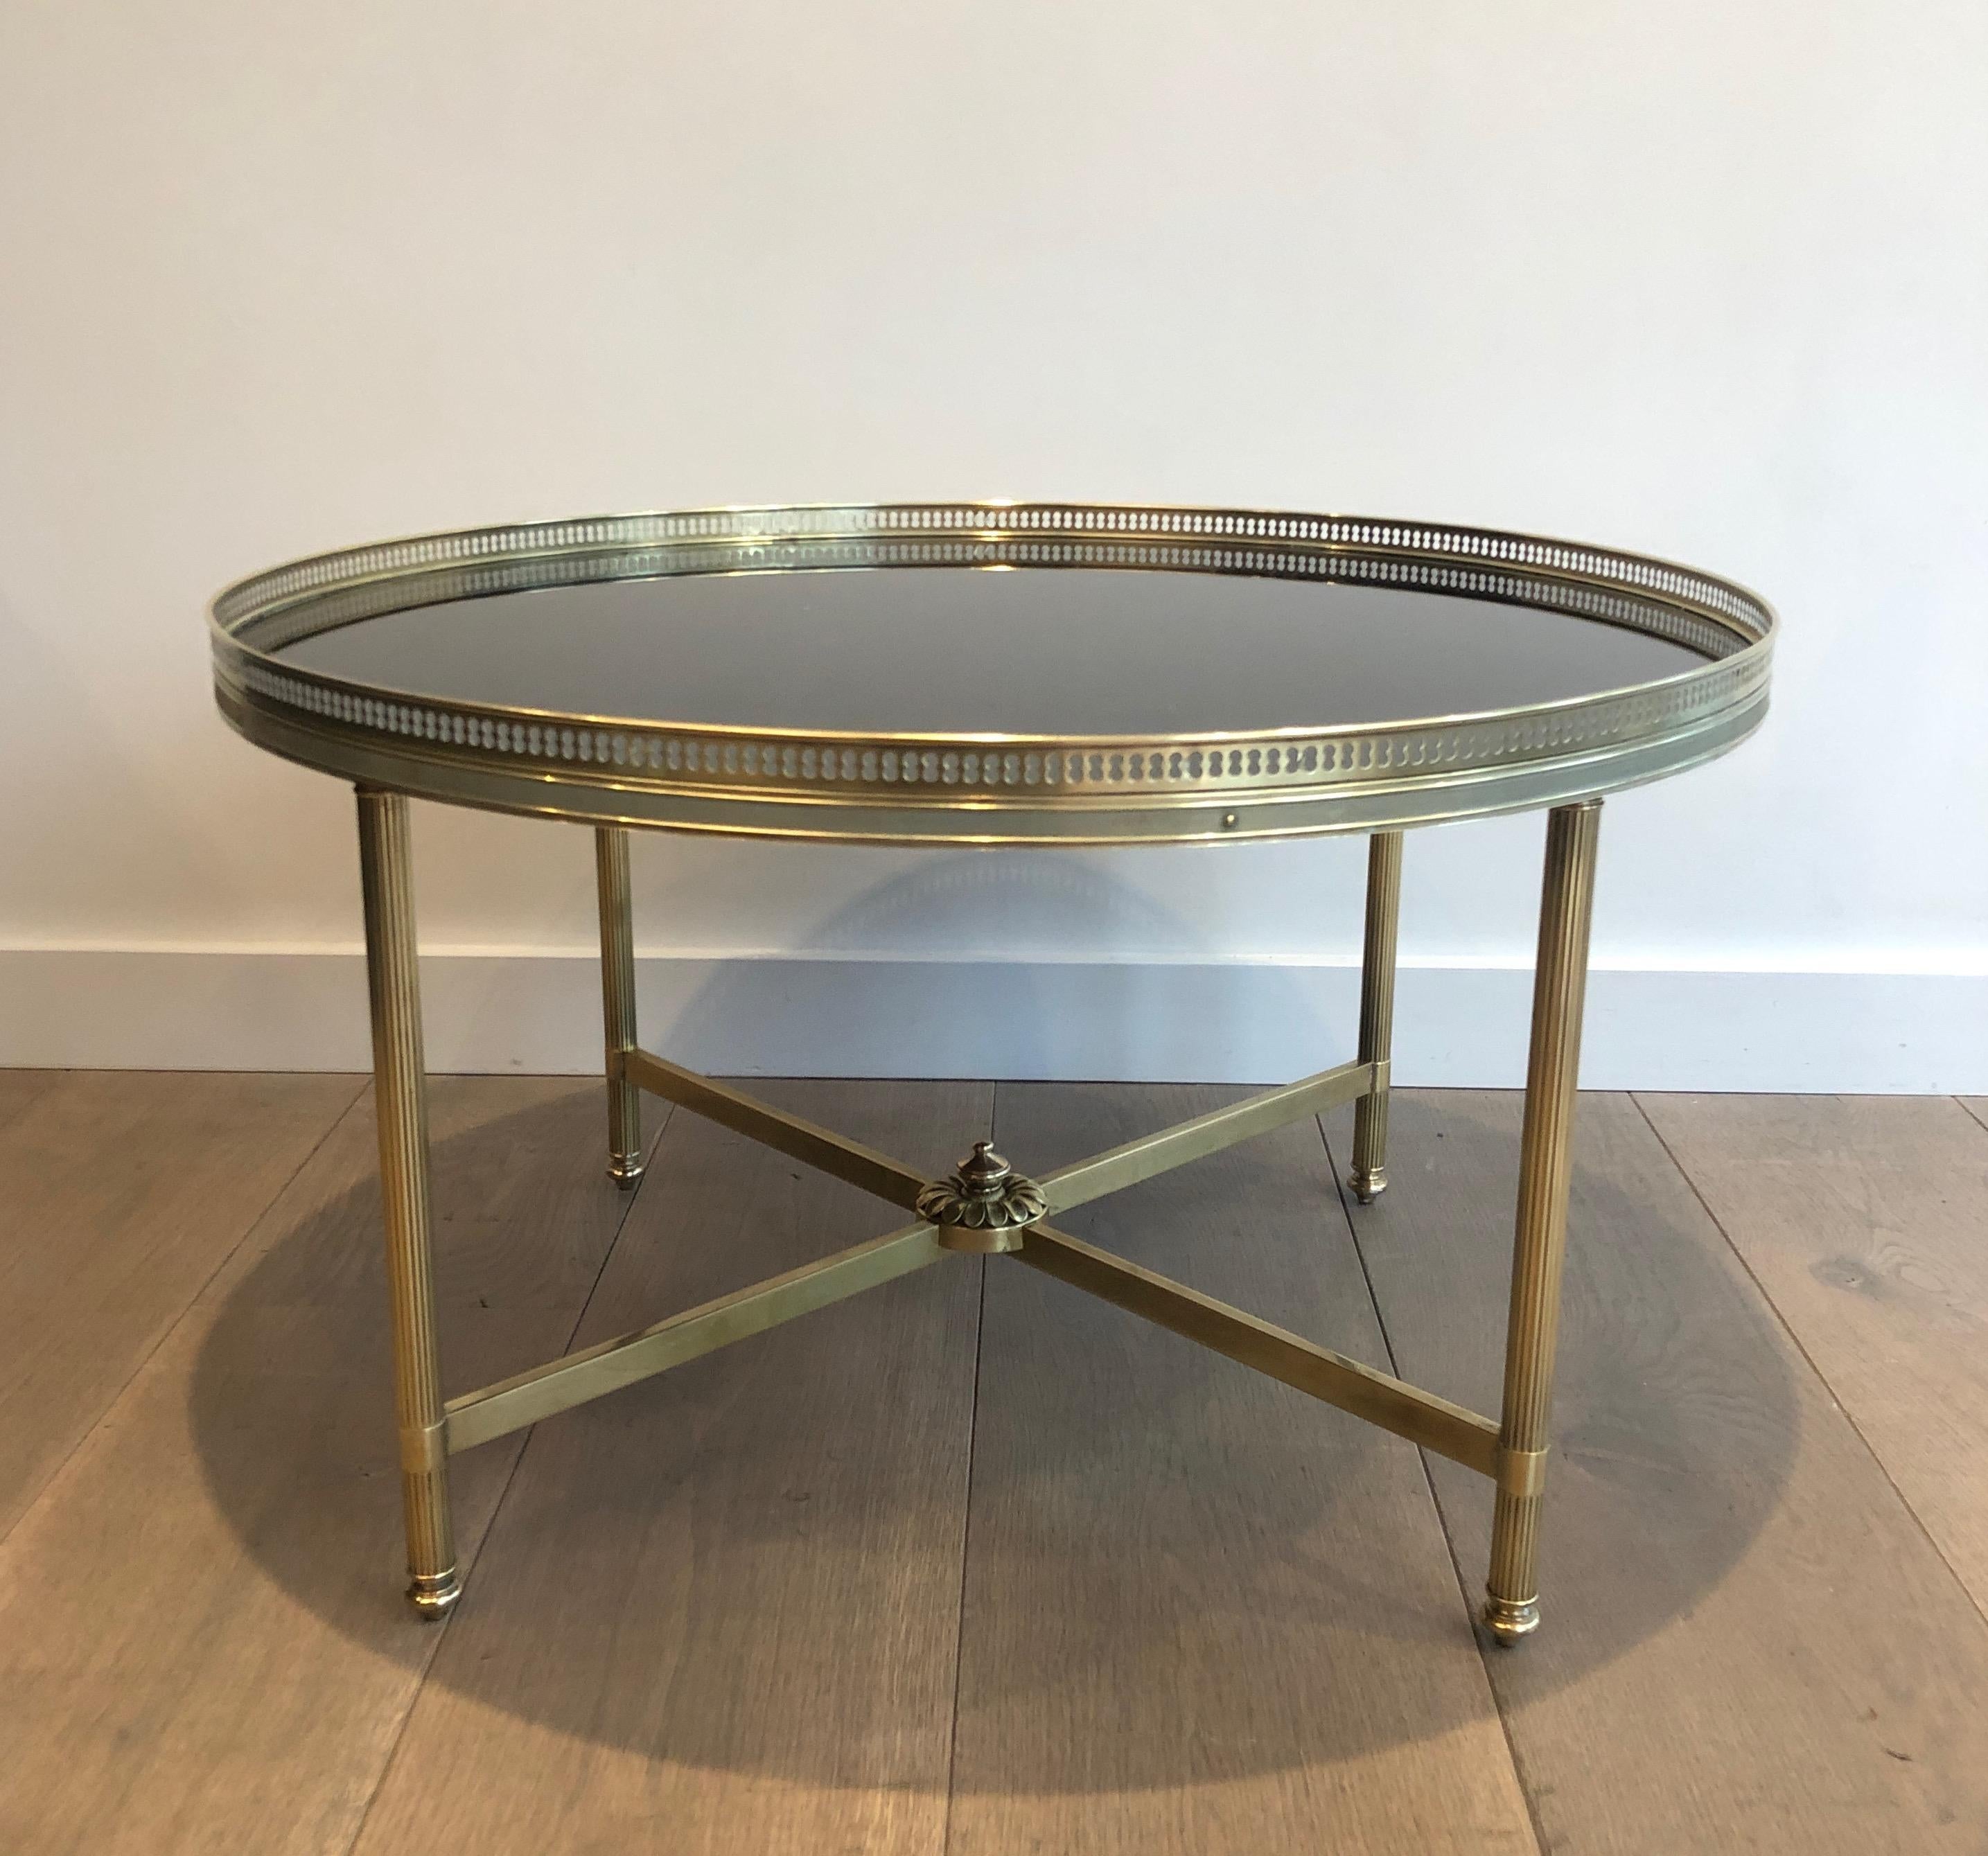 Maison Jansen. Neoclassical Style Brass coffee table with black lacquered glass top. French. Circa 1940.